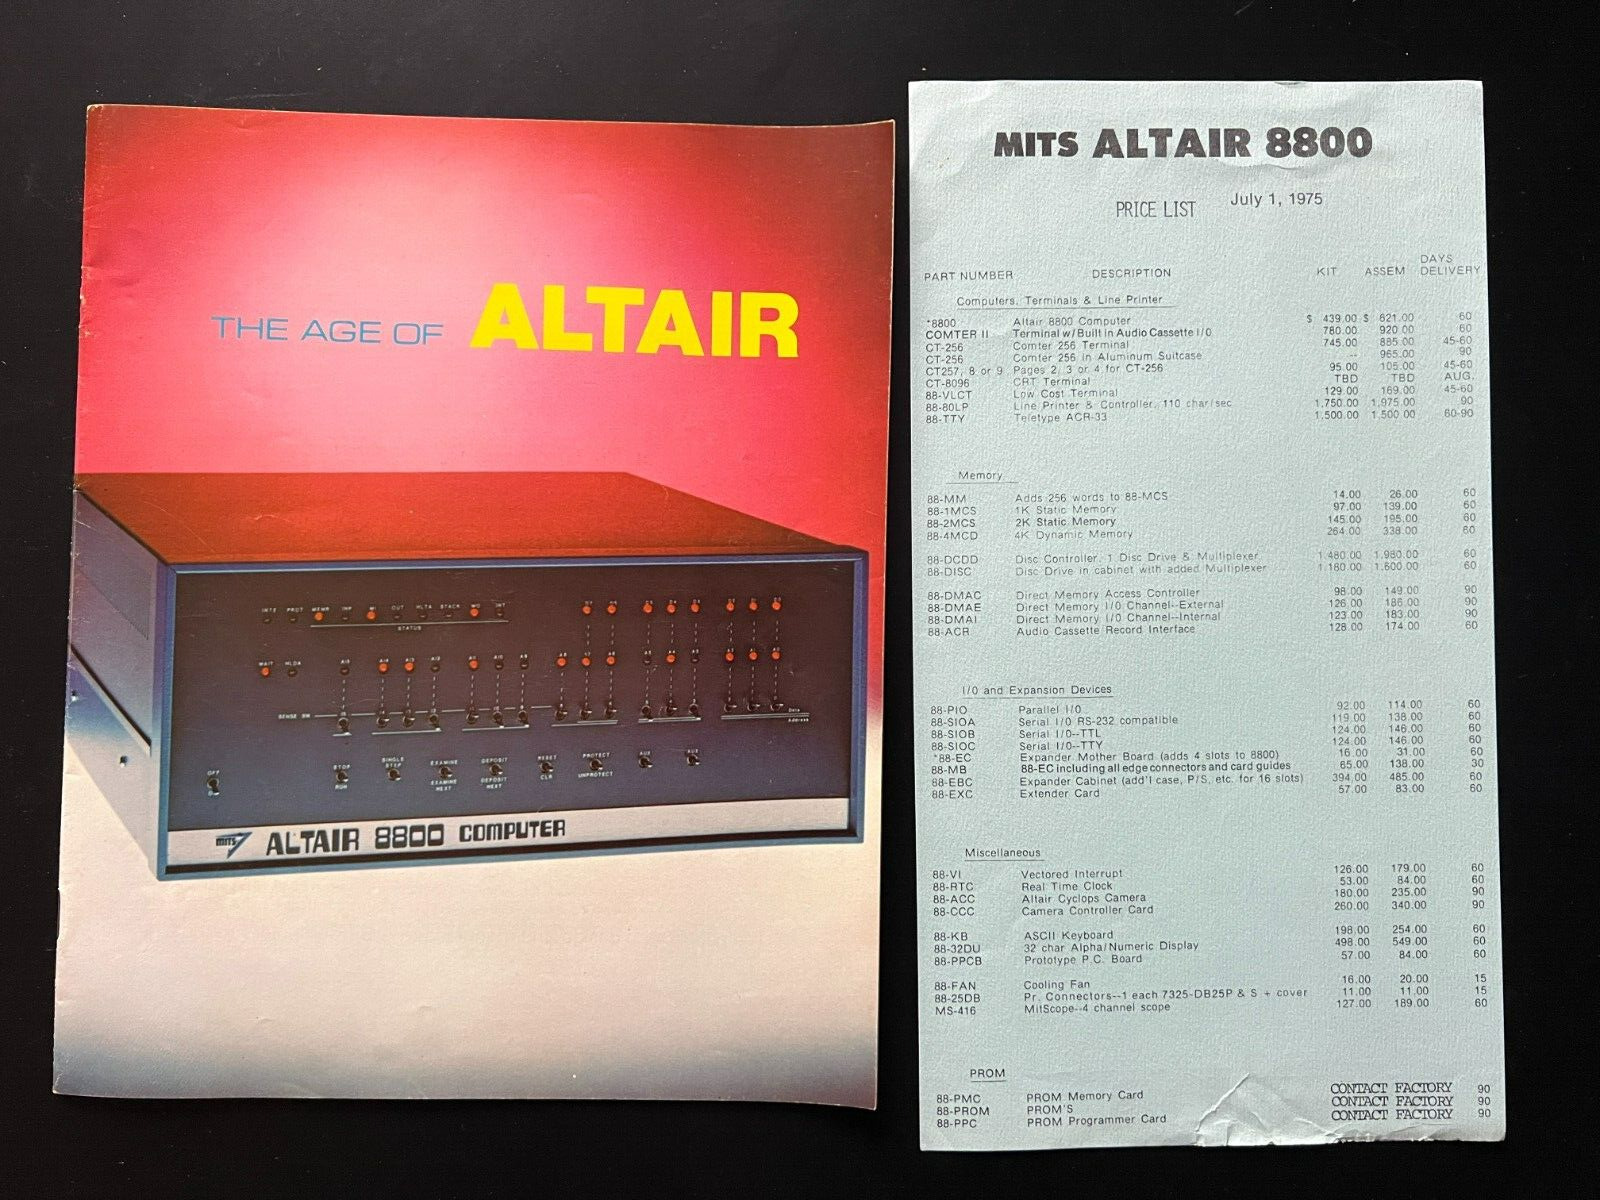 Vintage The Age of Altair MITS Brochure with 1975 Price Guide